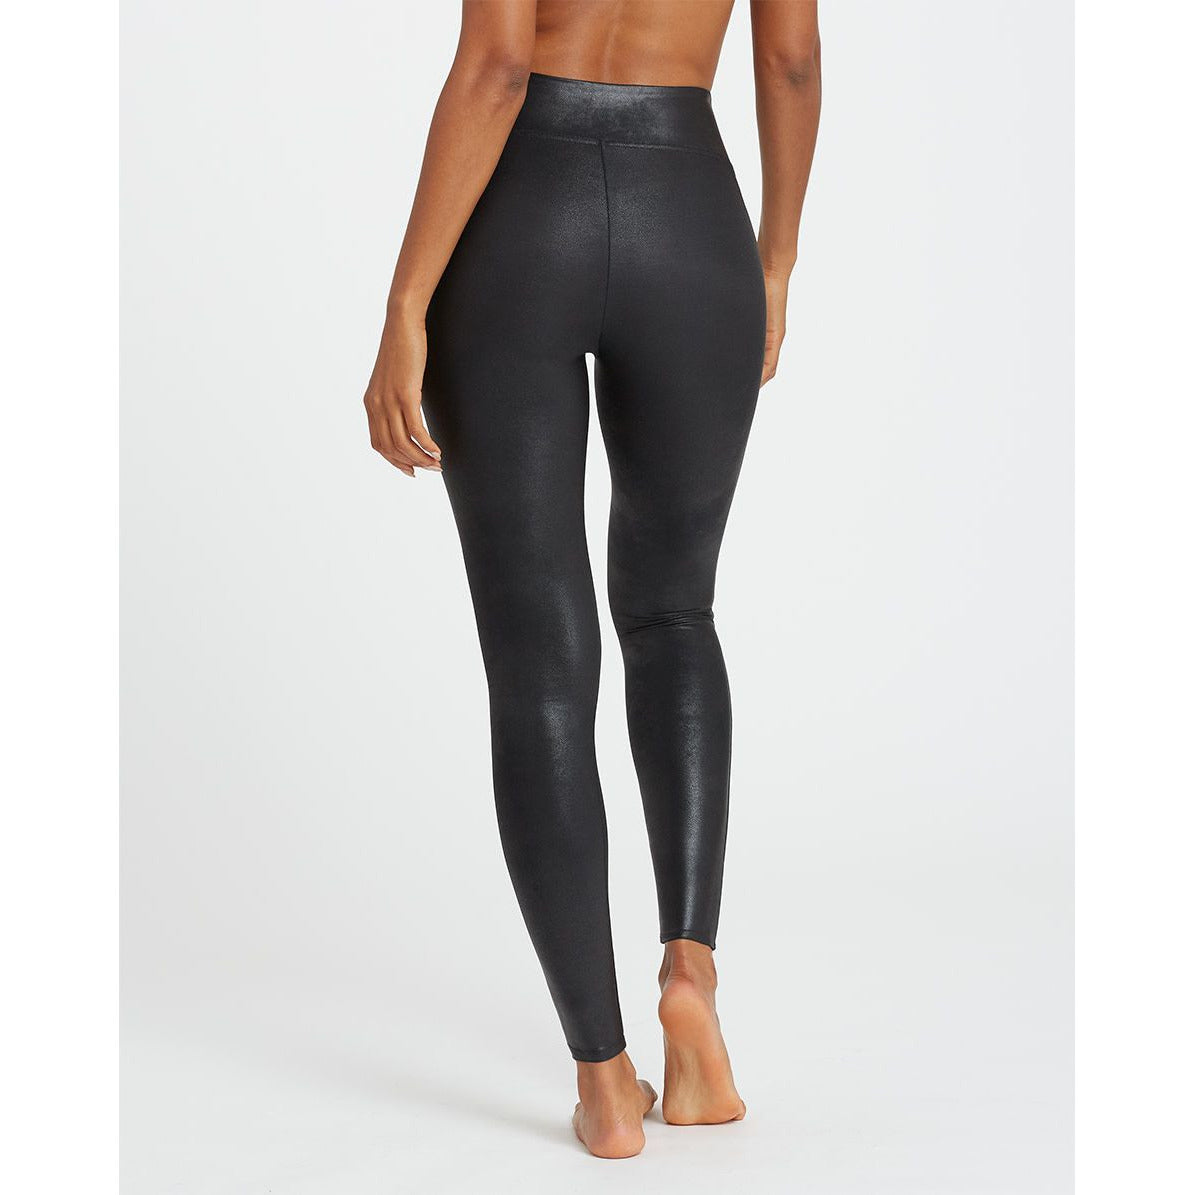 SPANX - Look at Me Now Leggings, Faux Leather Leggings, or Booty